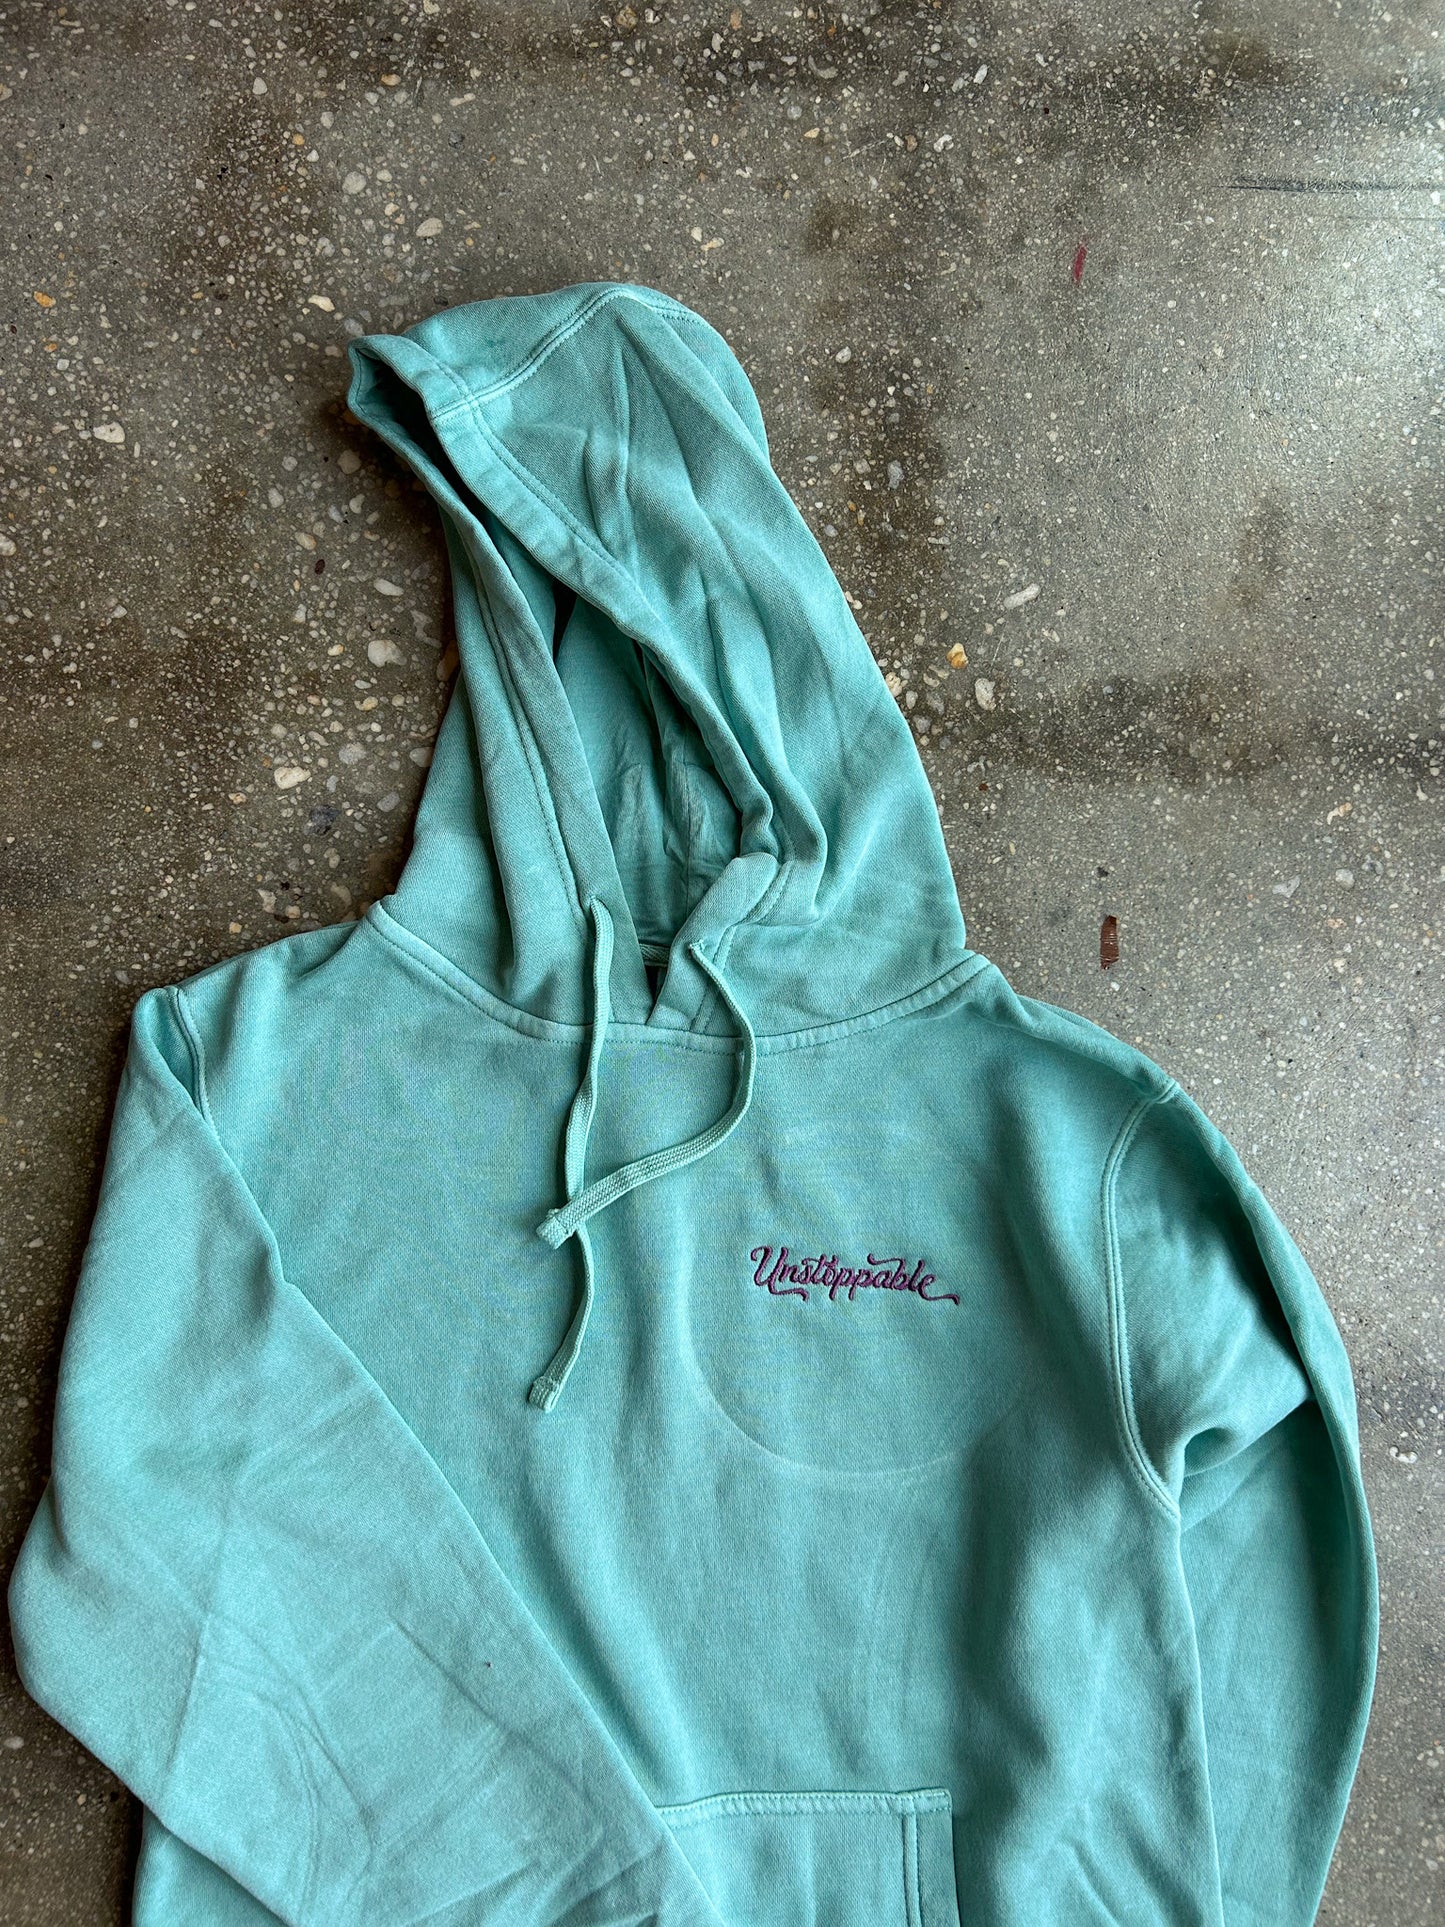 Unstoppable Embroidered Adult Box Hoodie